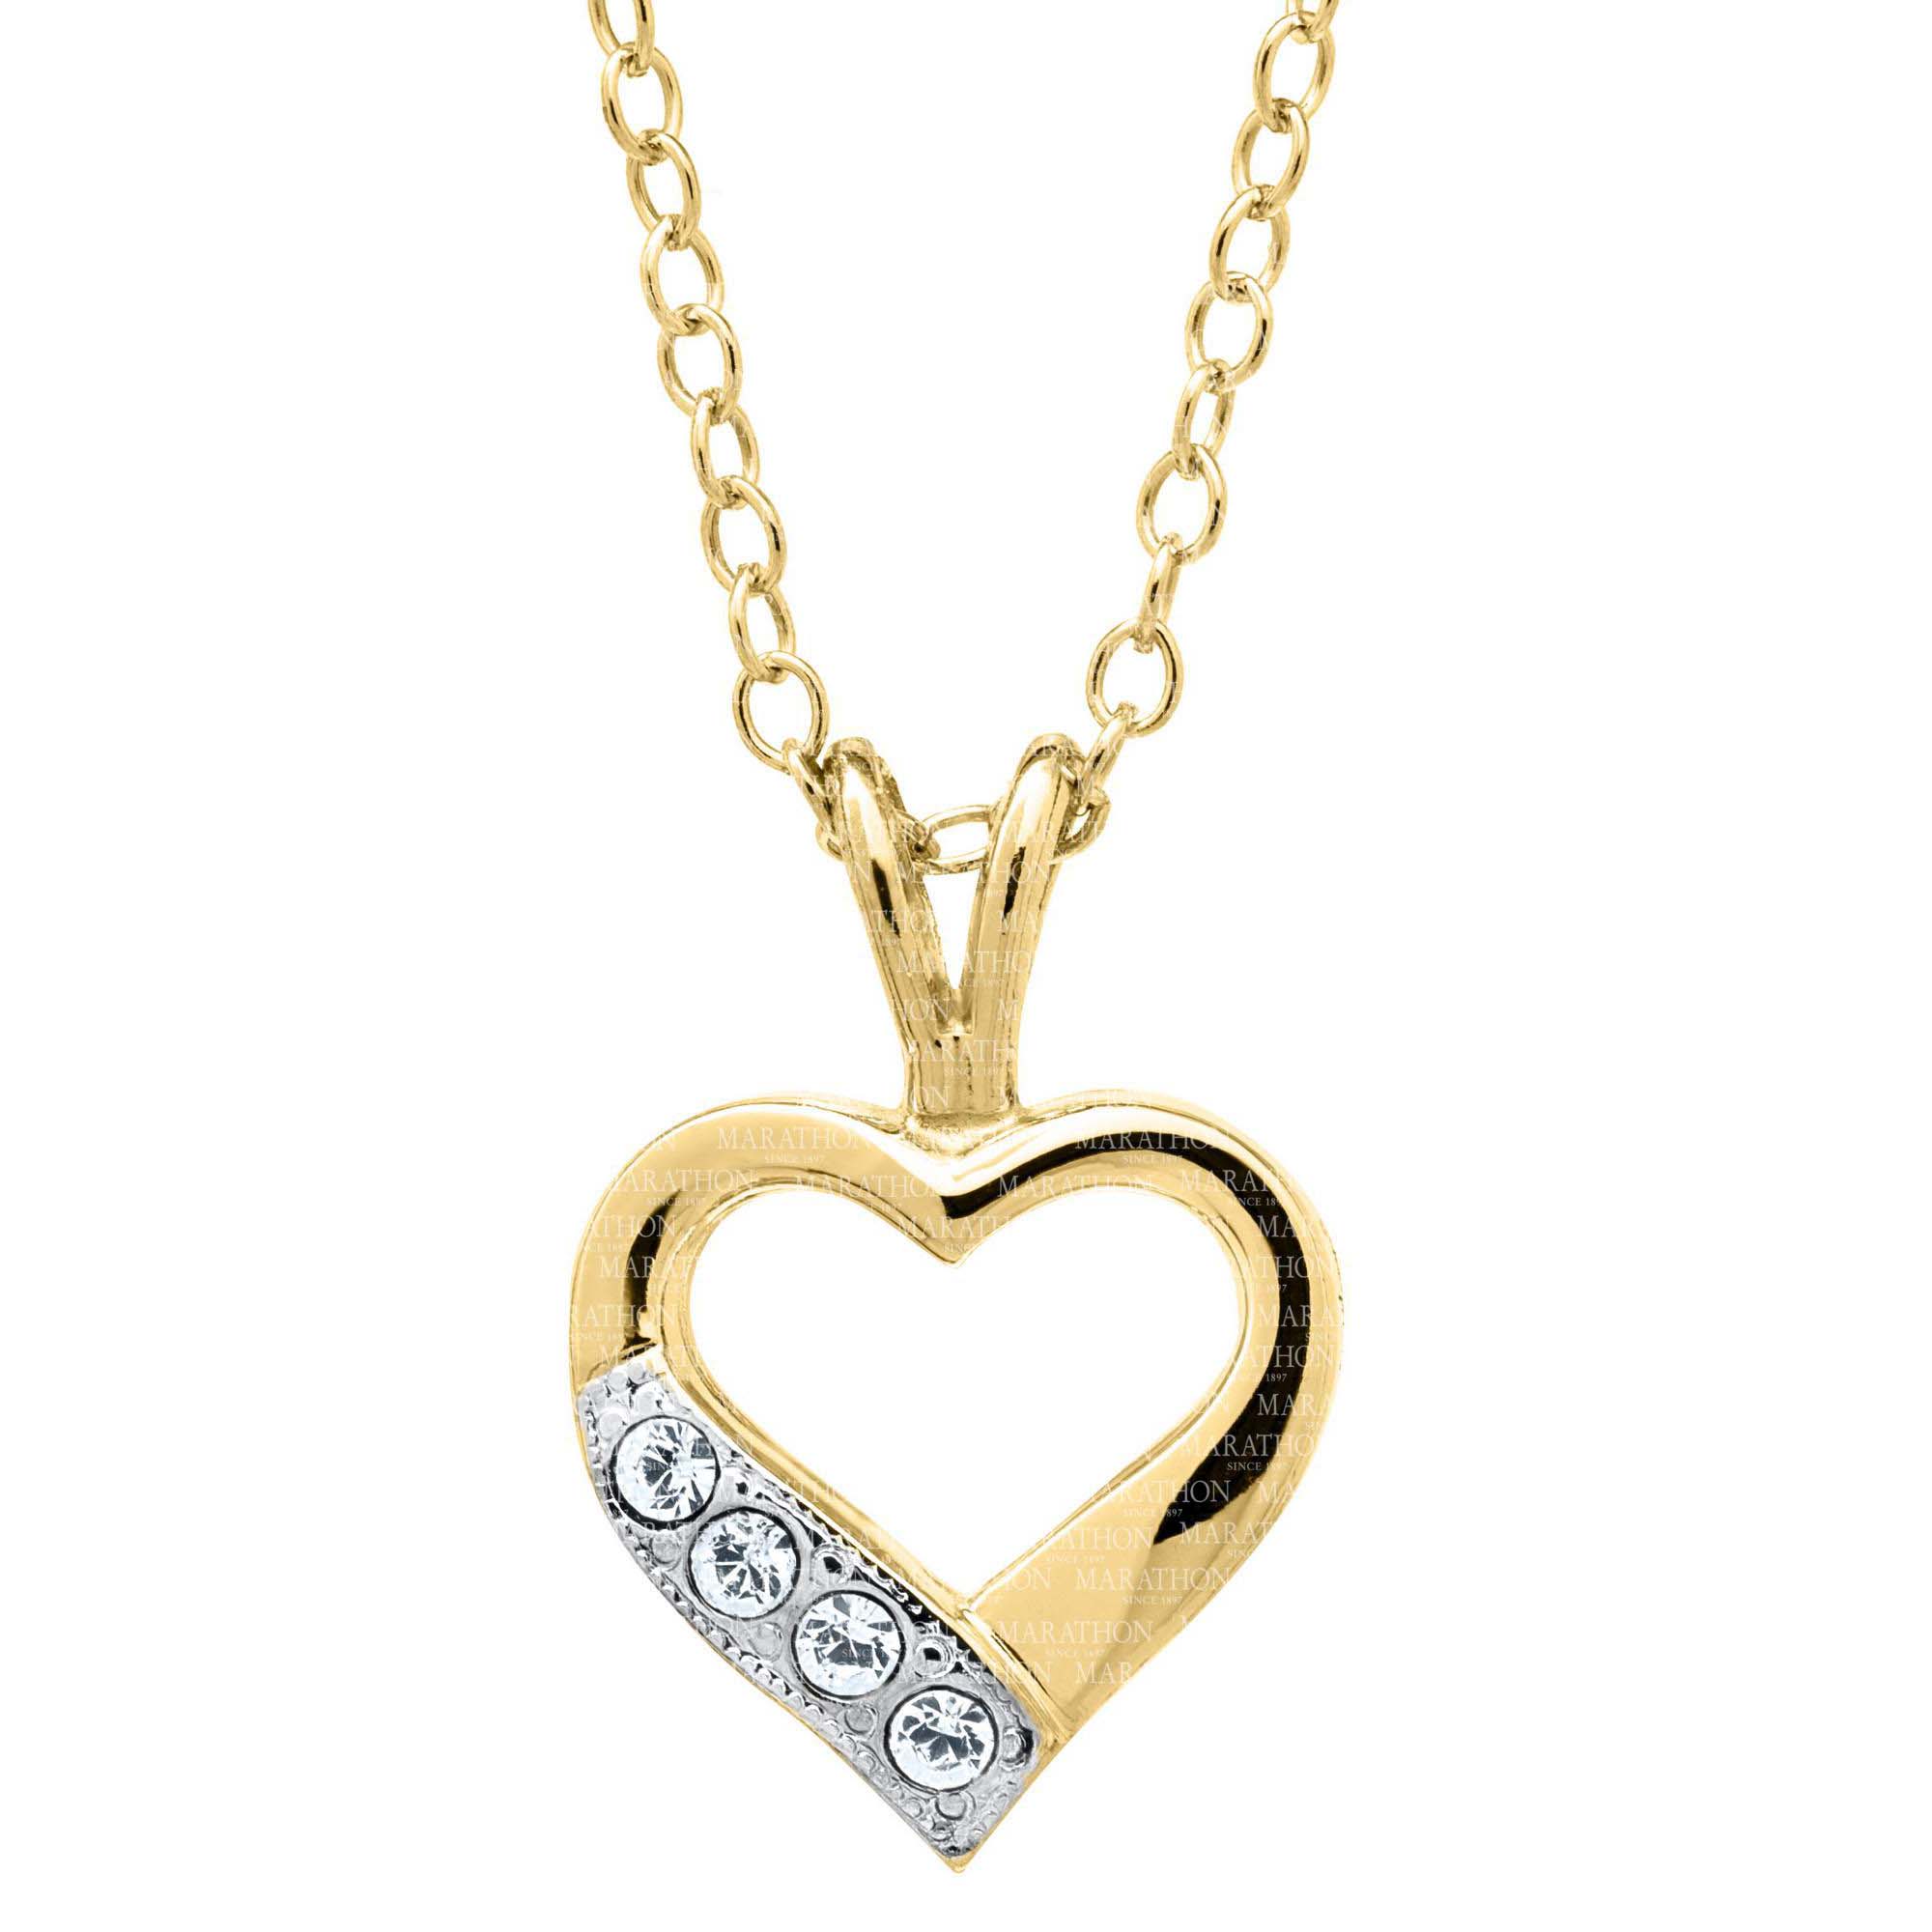 14K Gold-Filled Crystal Heart Locket. 11x16mm. 15" chain. #12370